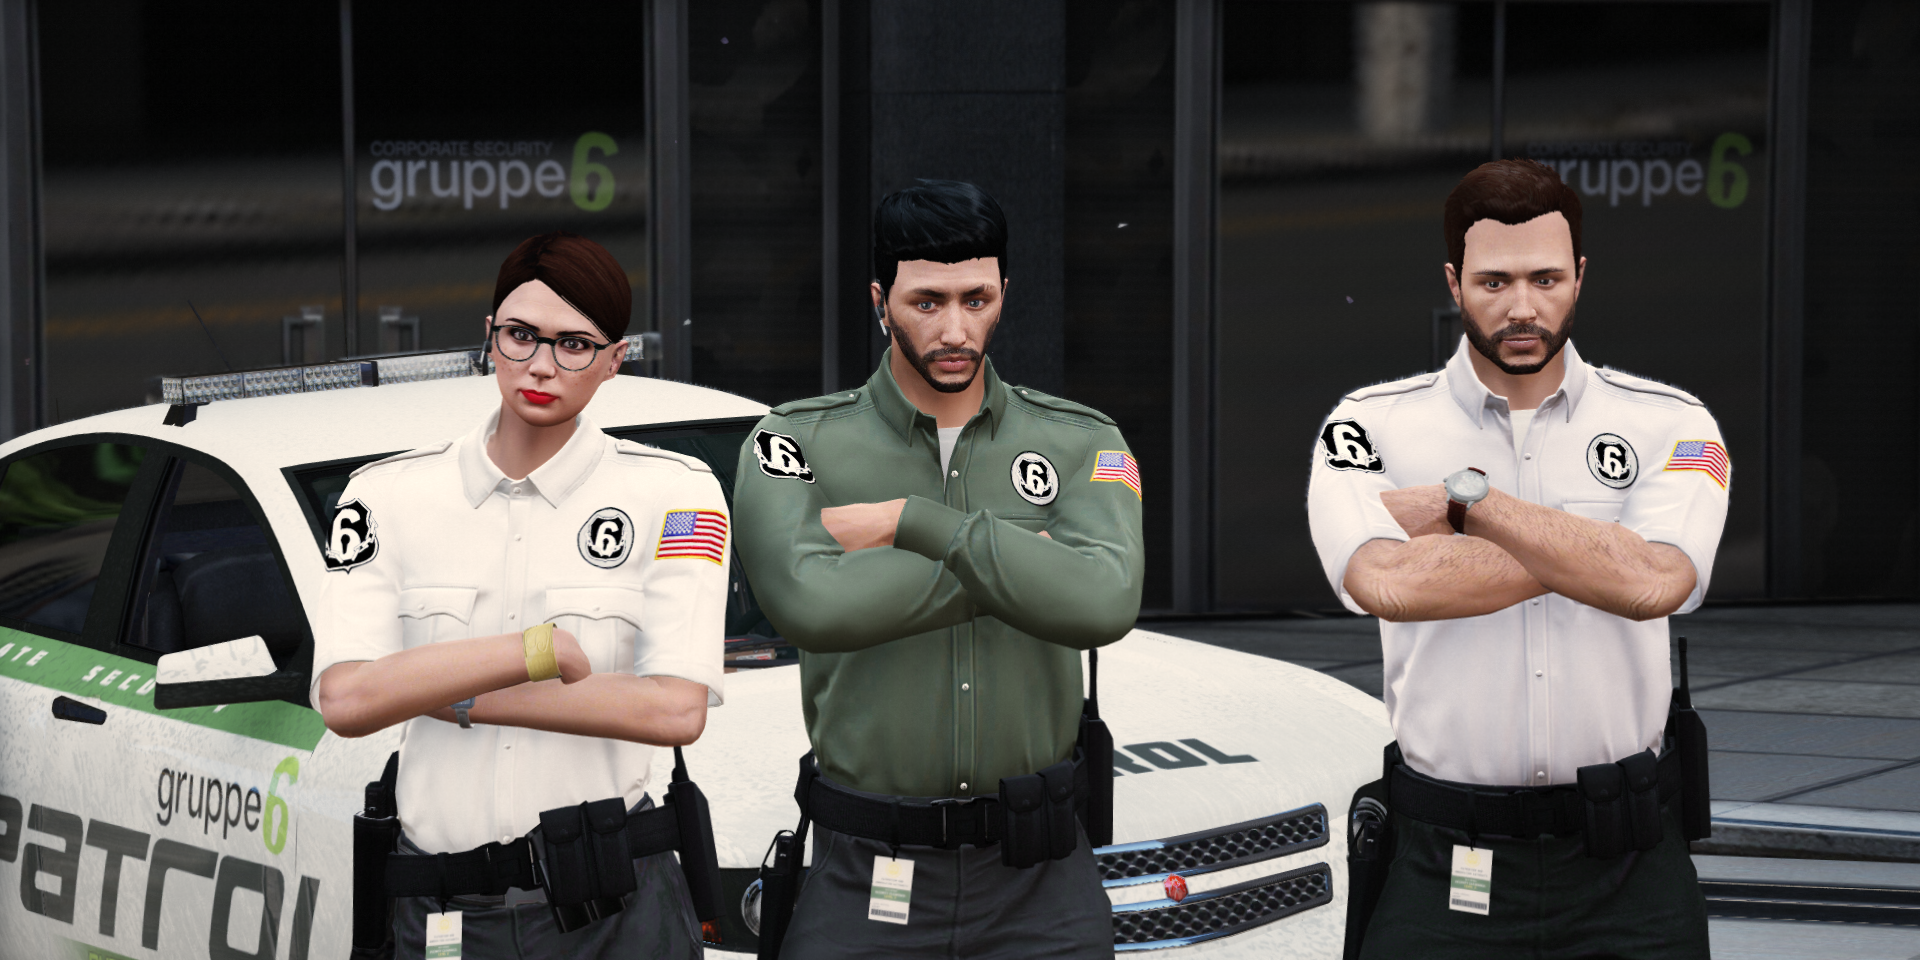 Grand Theft Auto Gruppe Sechs security